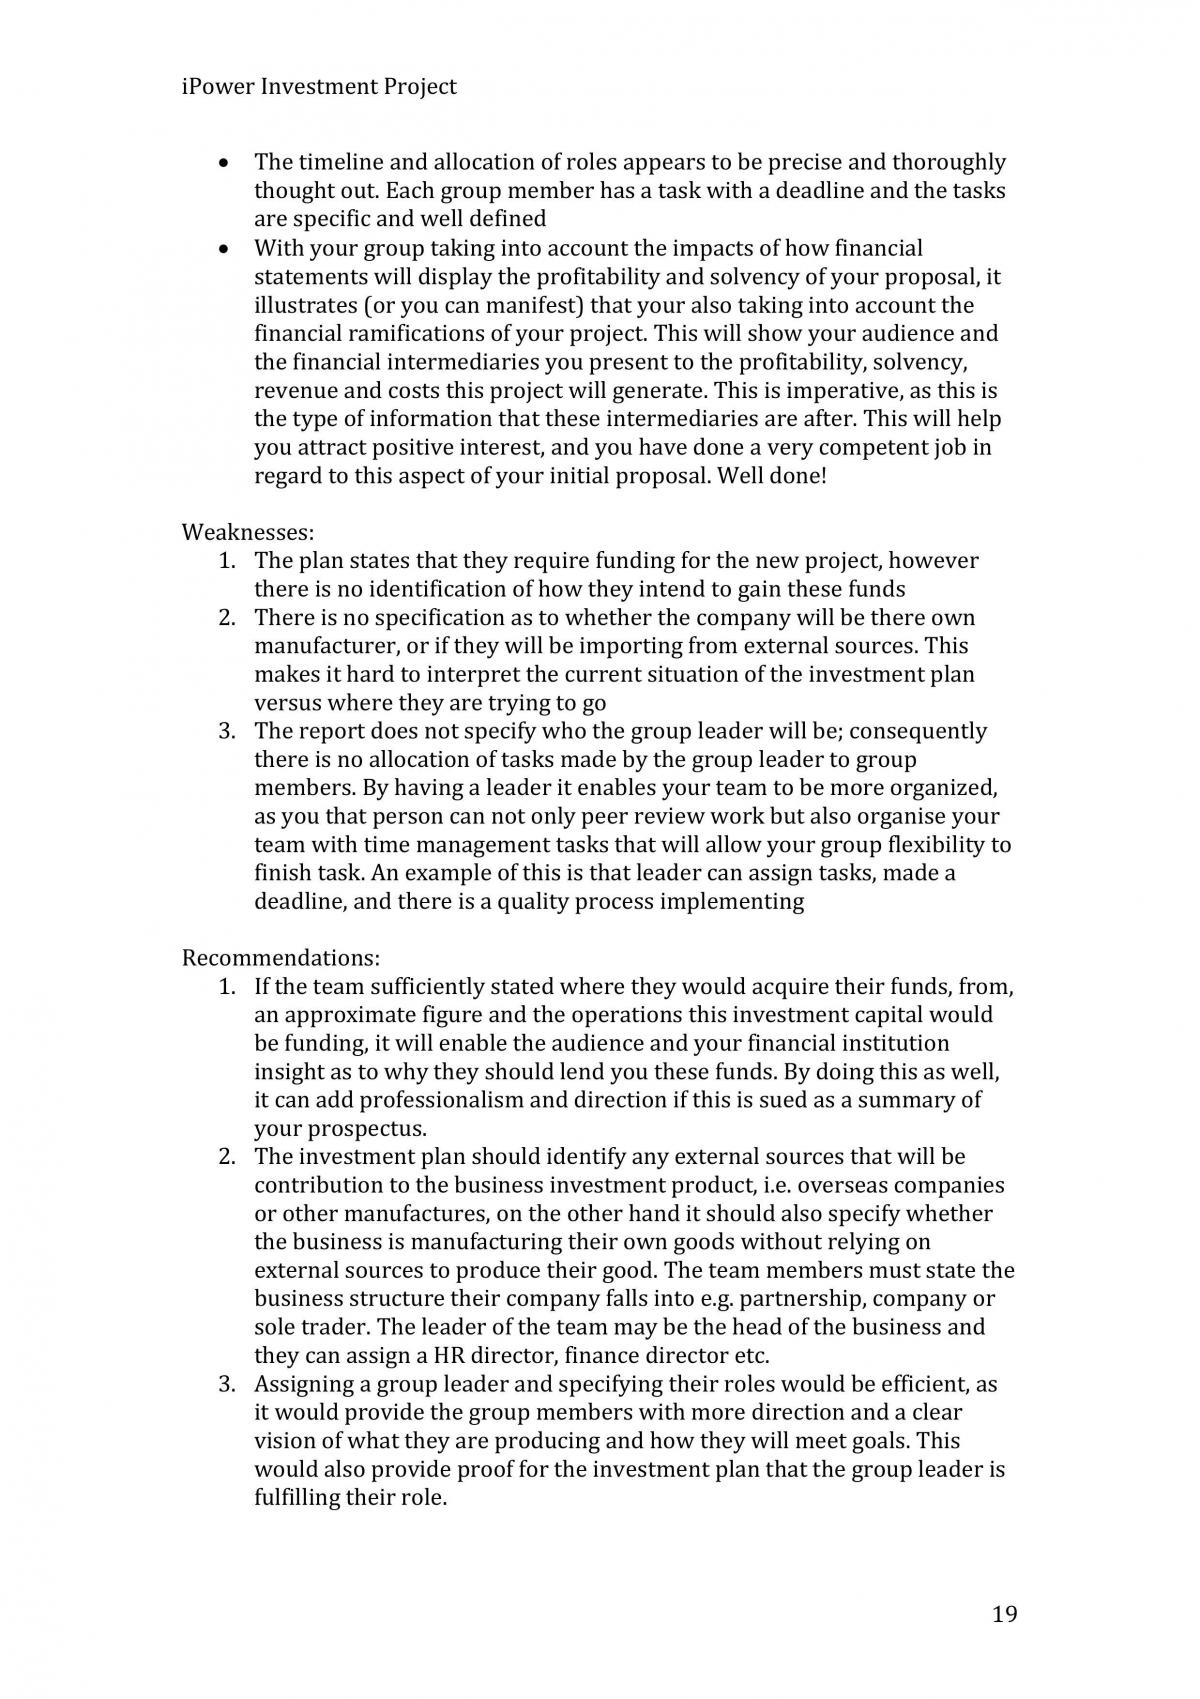 ACCG106 full assignment  - Page 19